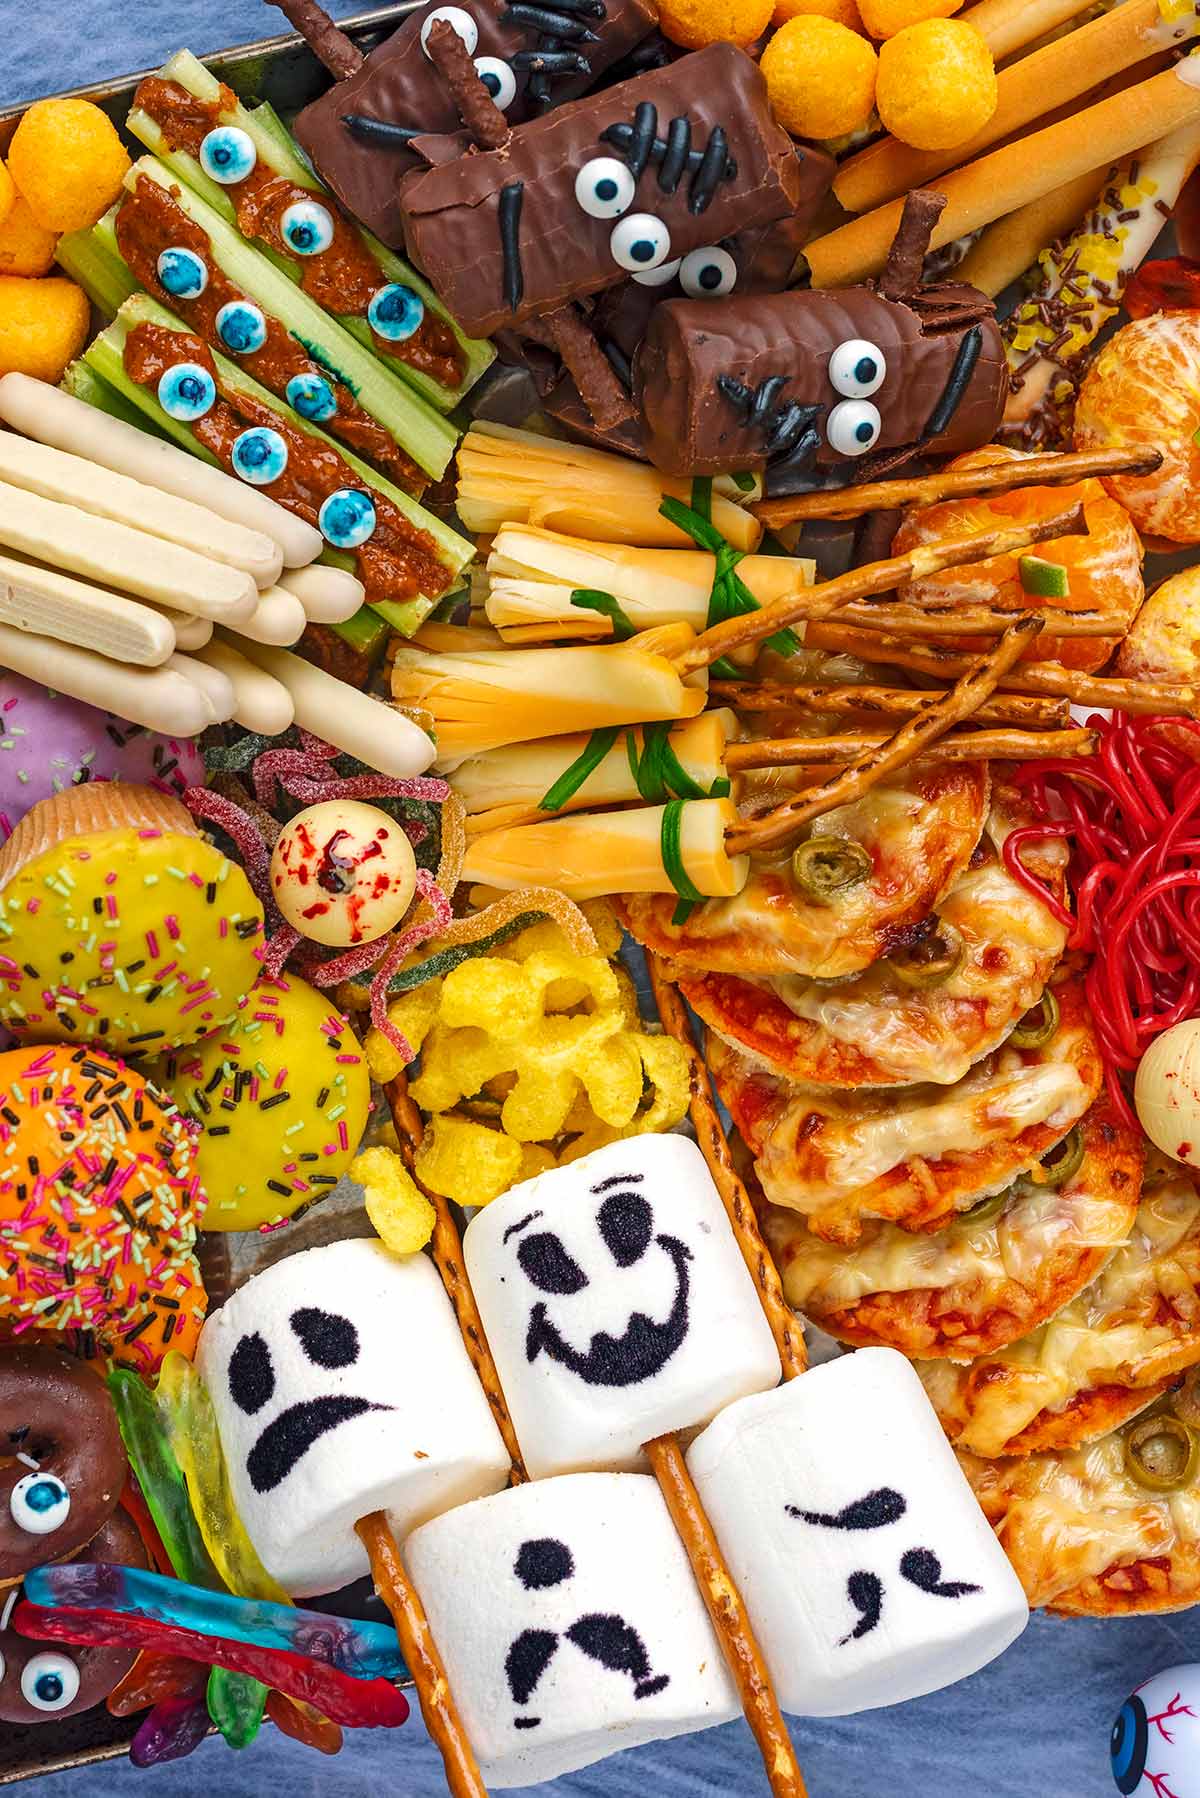 Various sweet treats set out on a platter, including marshmallow ghosts, cheese broomsticks and chocolate eyeballs.